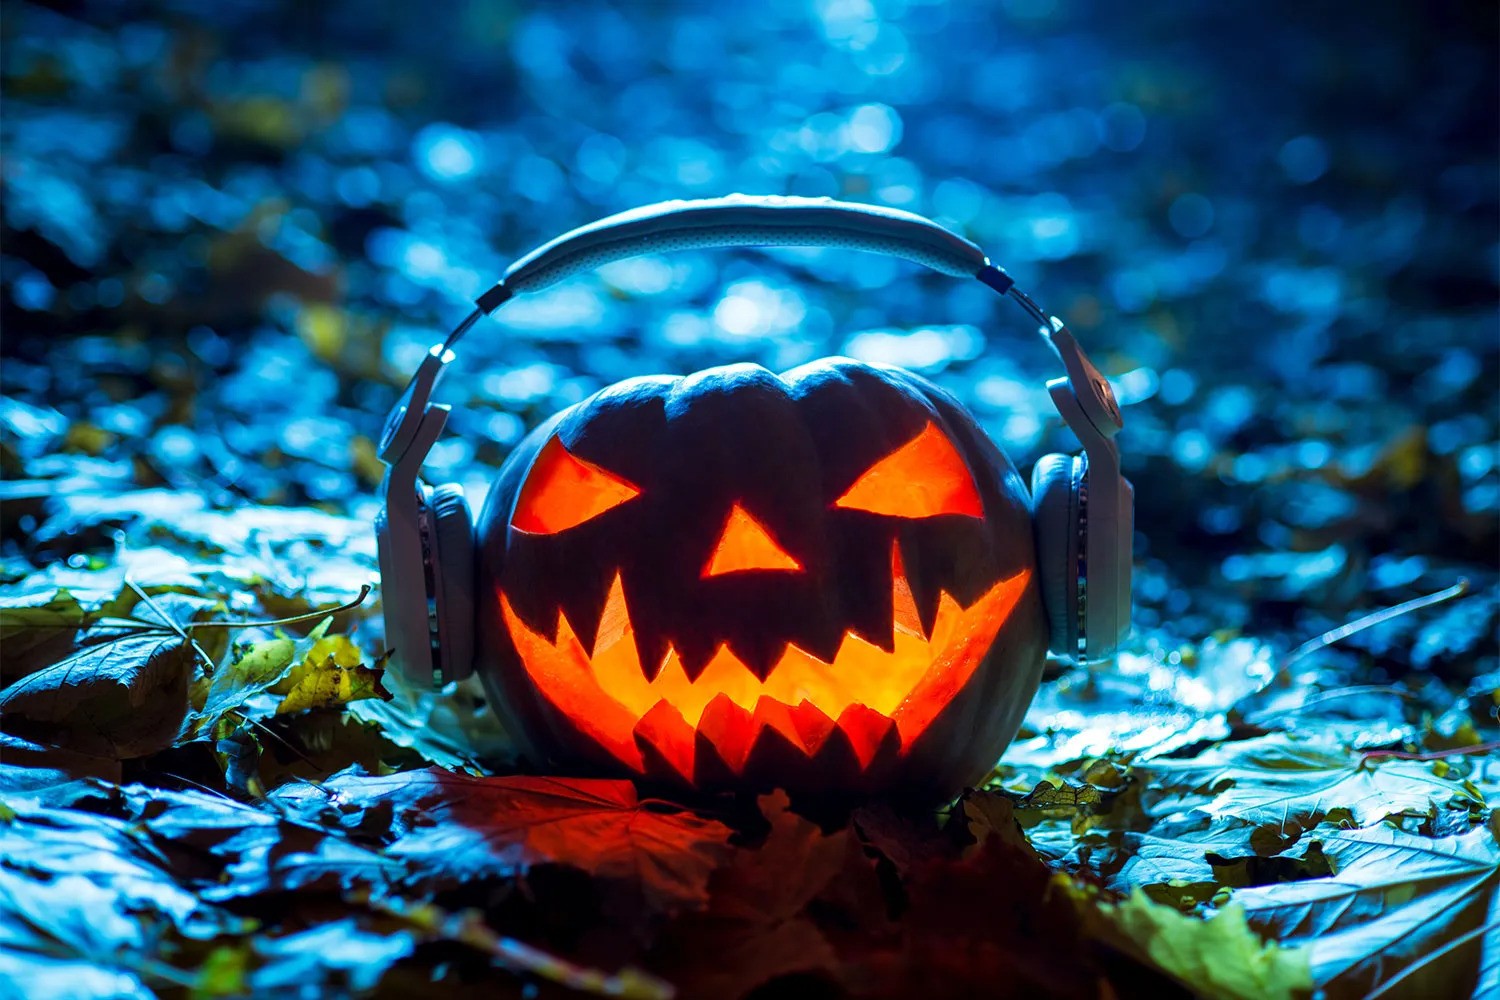 Top 10 Halloween Albums To Set The Perfect Spooky Atmosphere